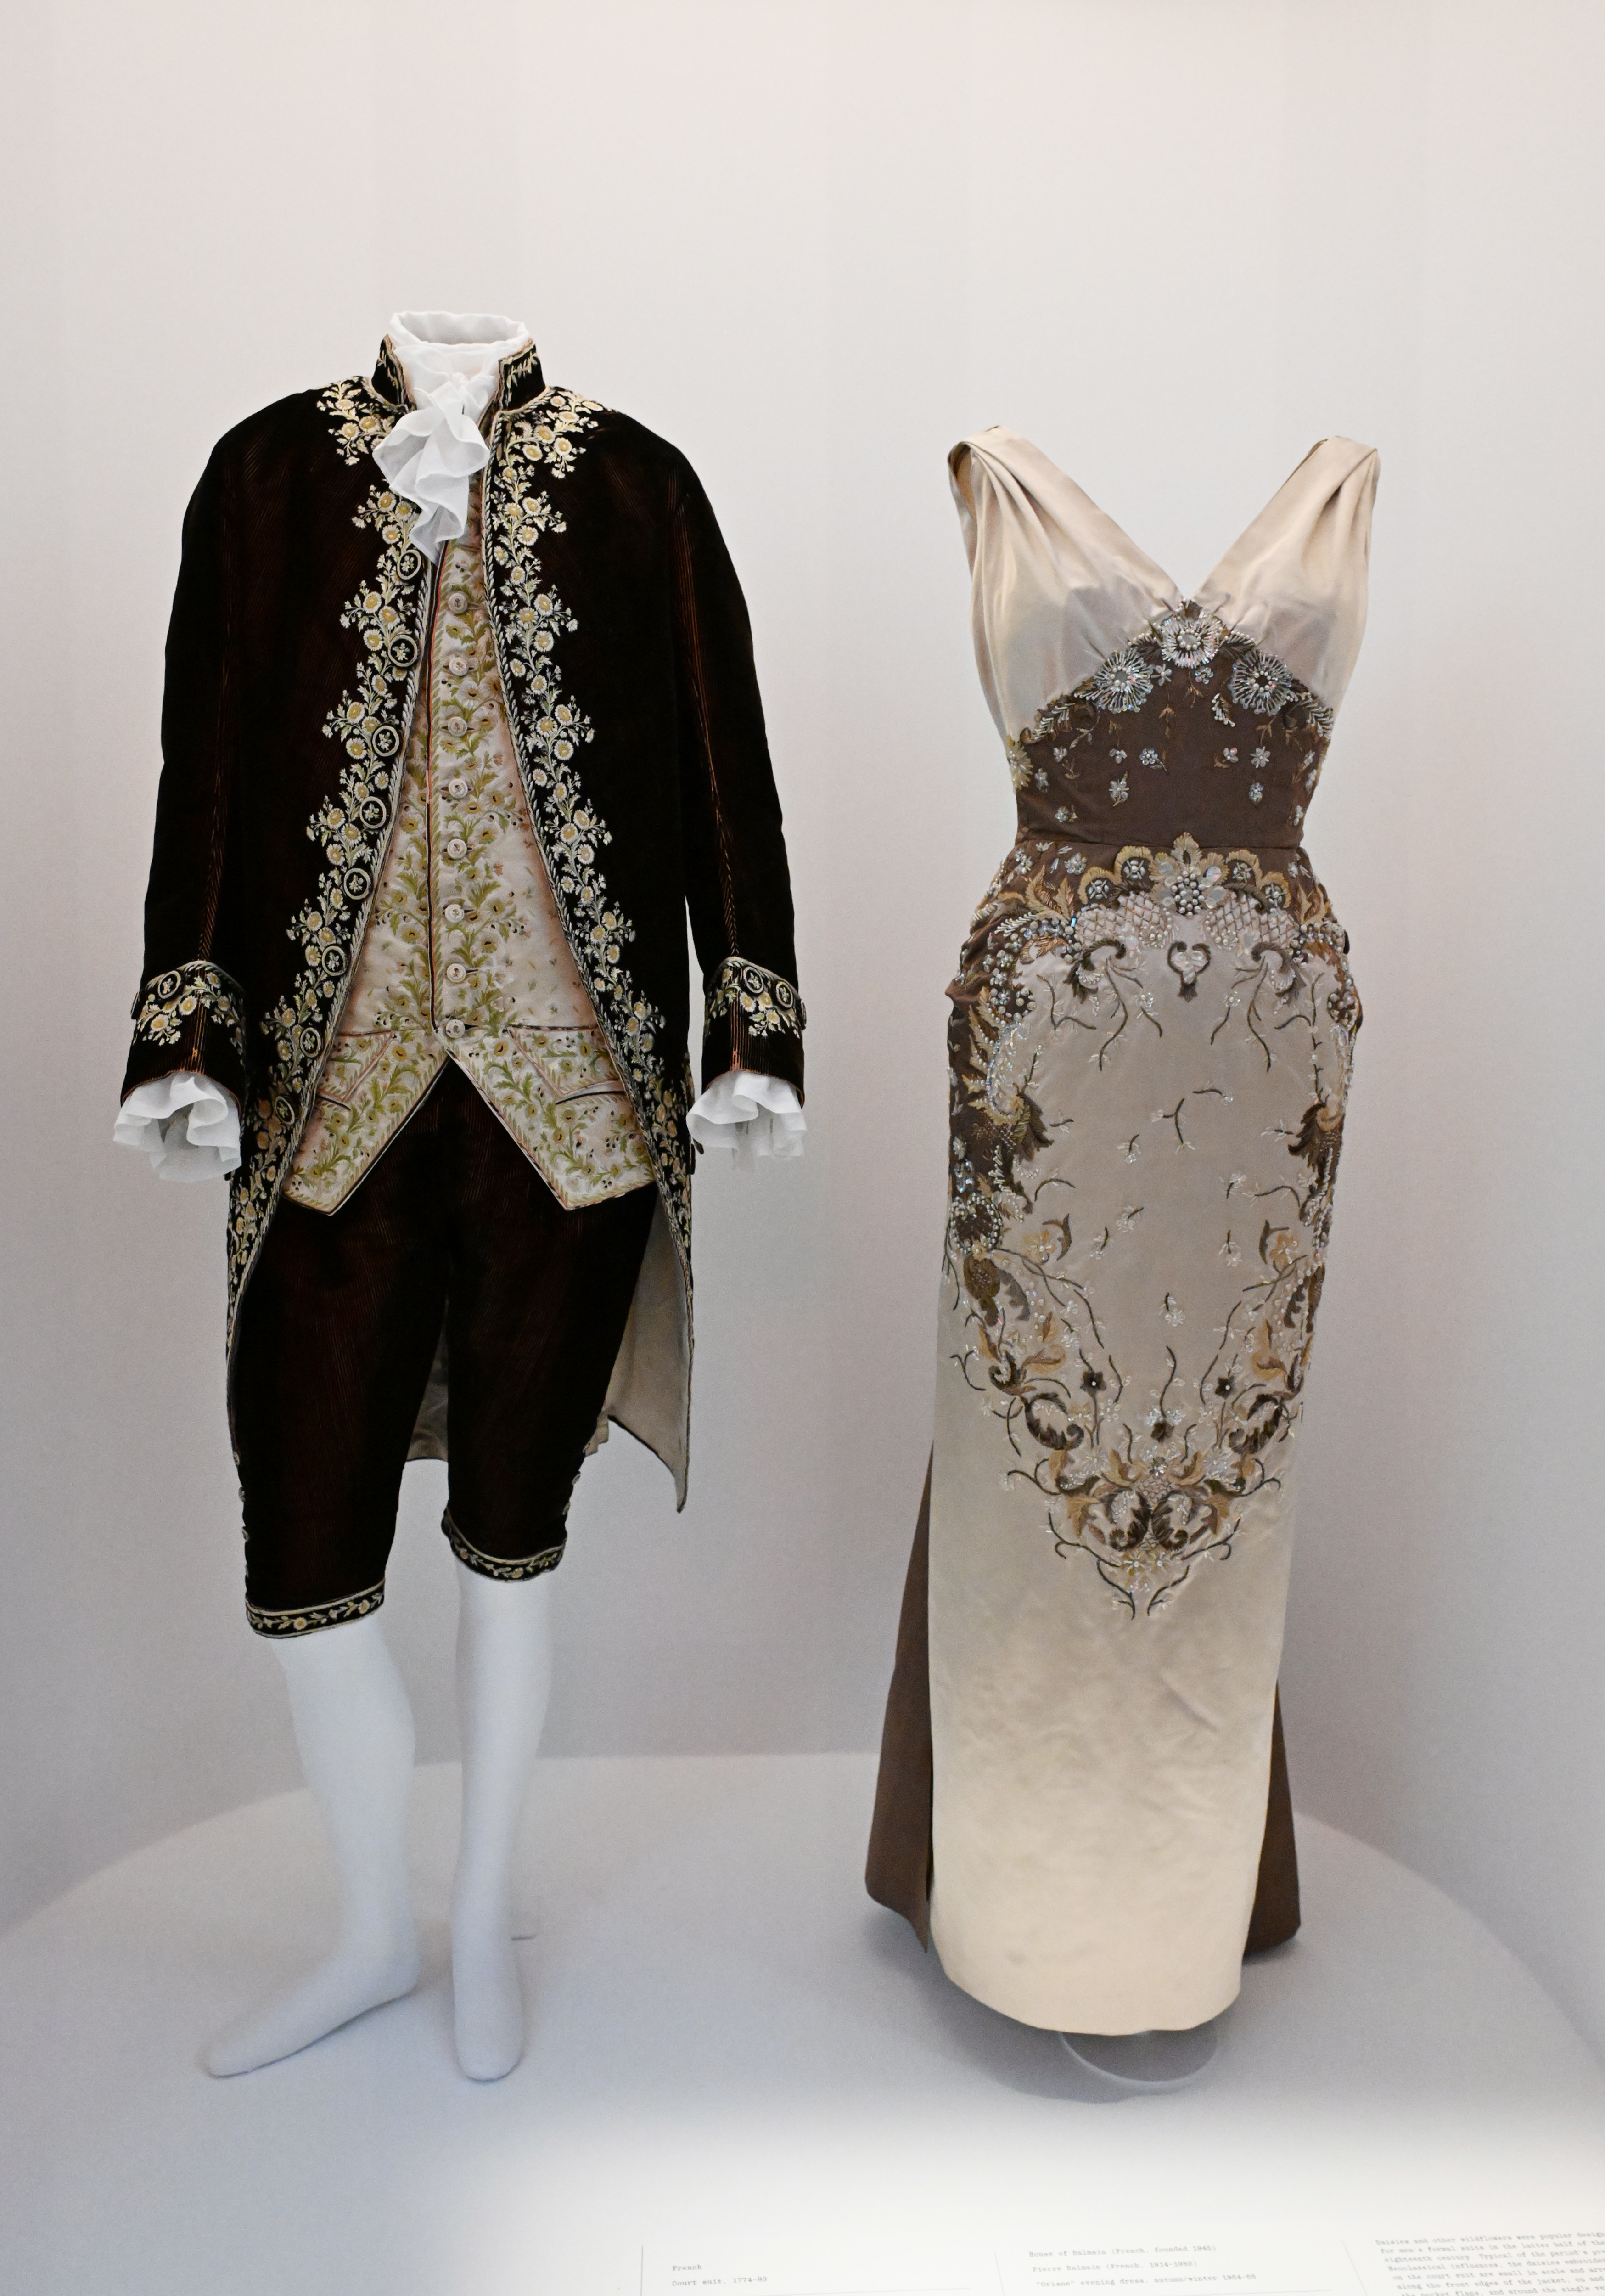 Historical male and female mannequins displaying ornate 18th-century-style costumes